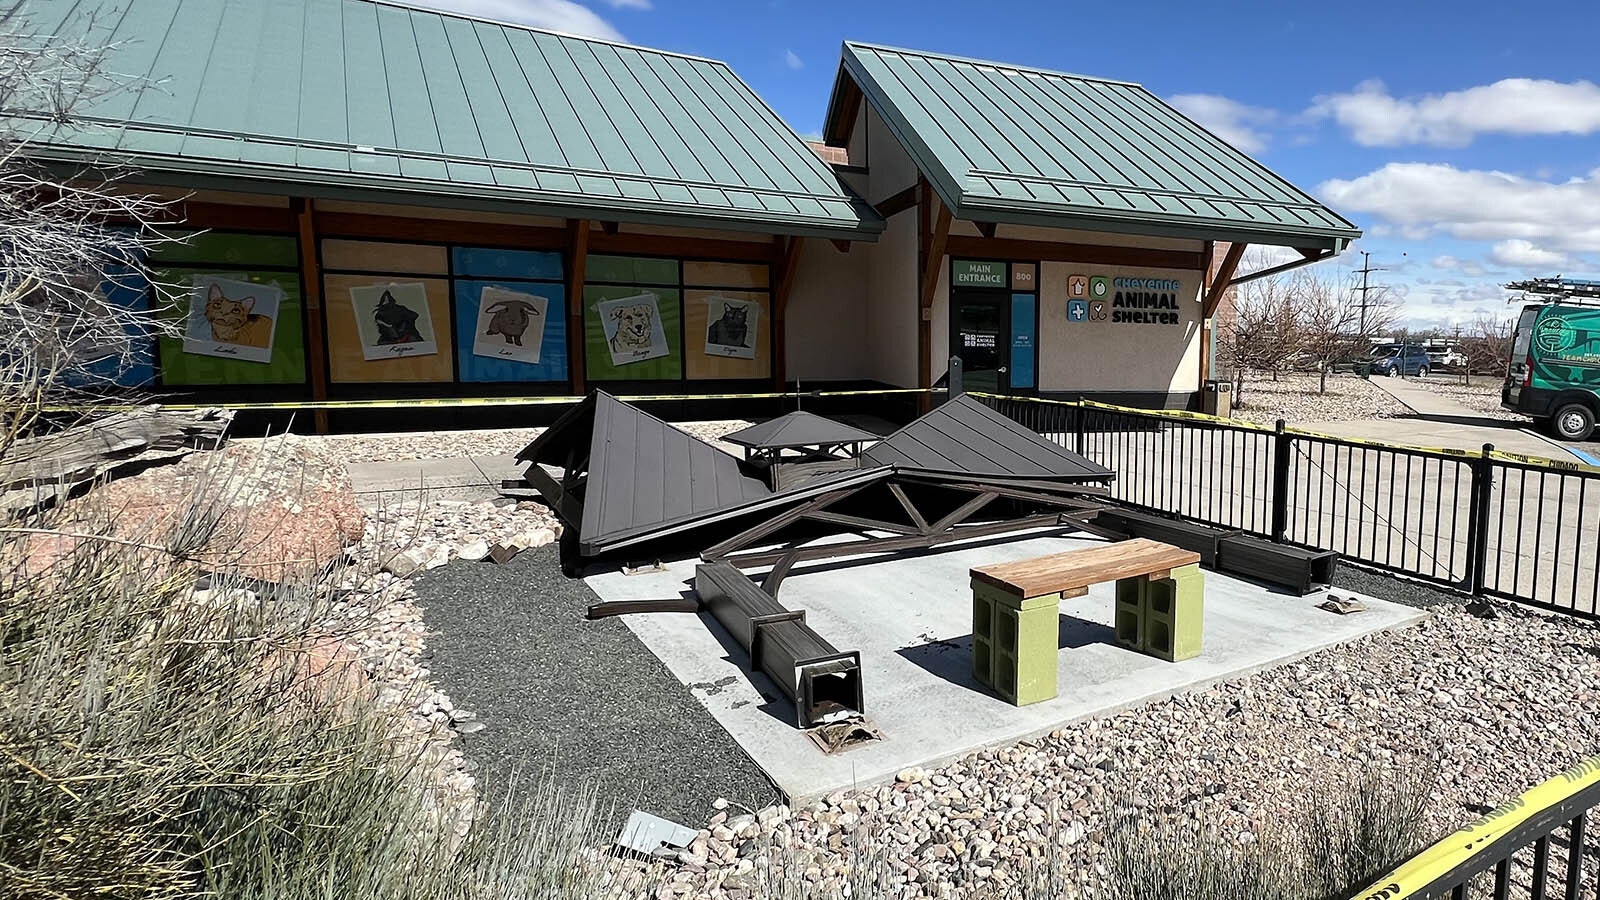 The weekend's windstorm that blew through Cheyenne with gusts up to 90 mph broke branches, uprooted trees and toppled this gazebo at the Cheyenne Animal Shelter.